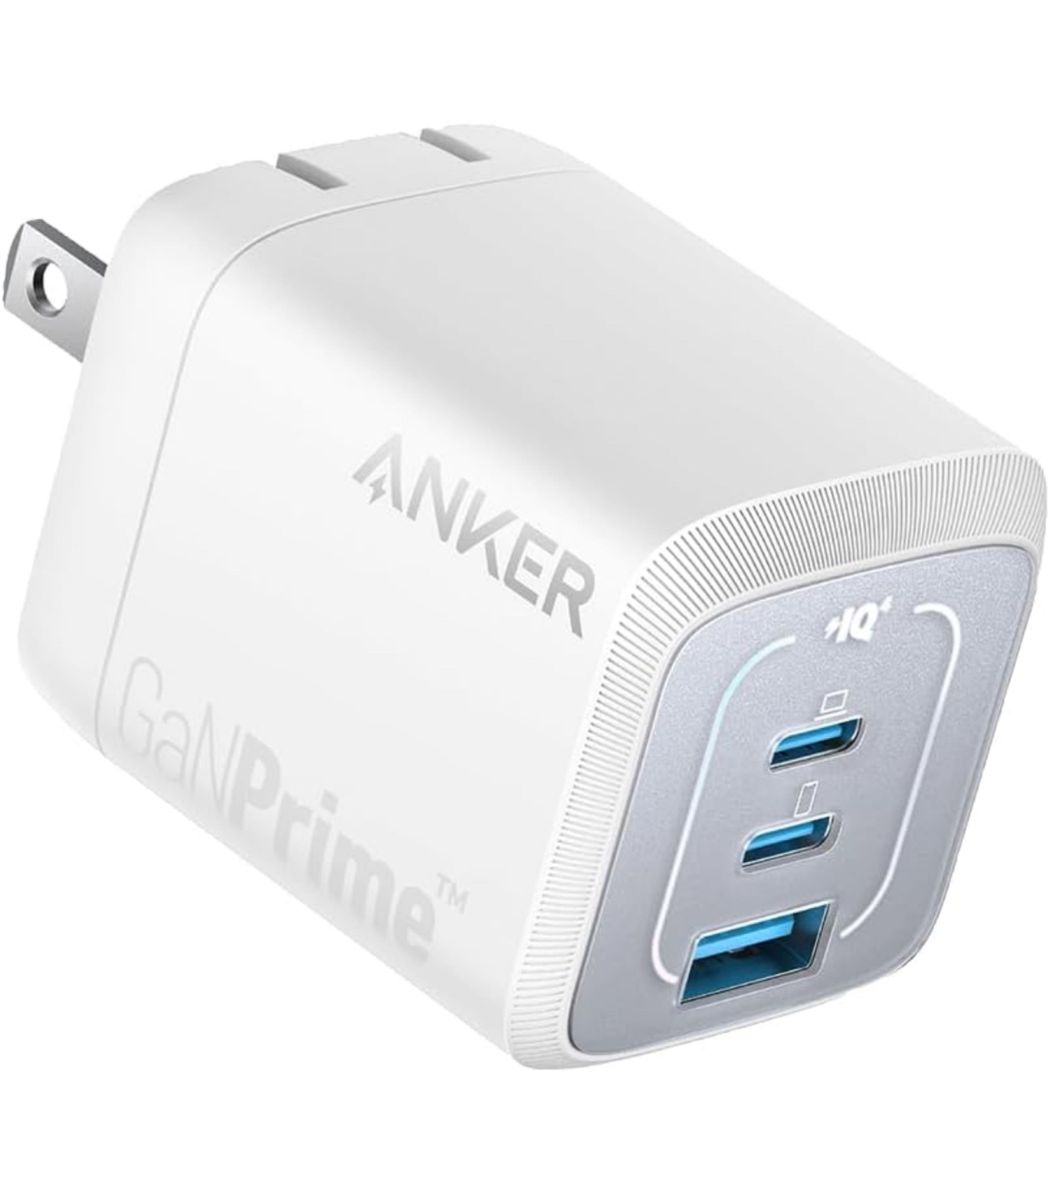 Anker Prime Wall Charger 67W ホワイト　新品